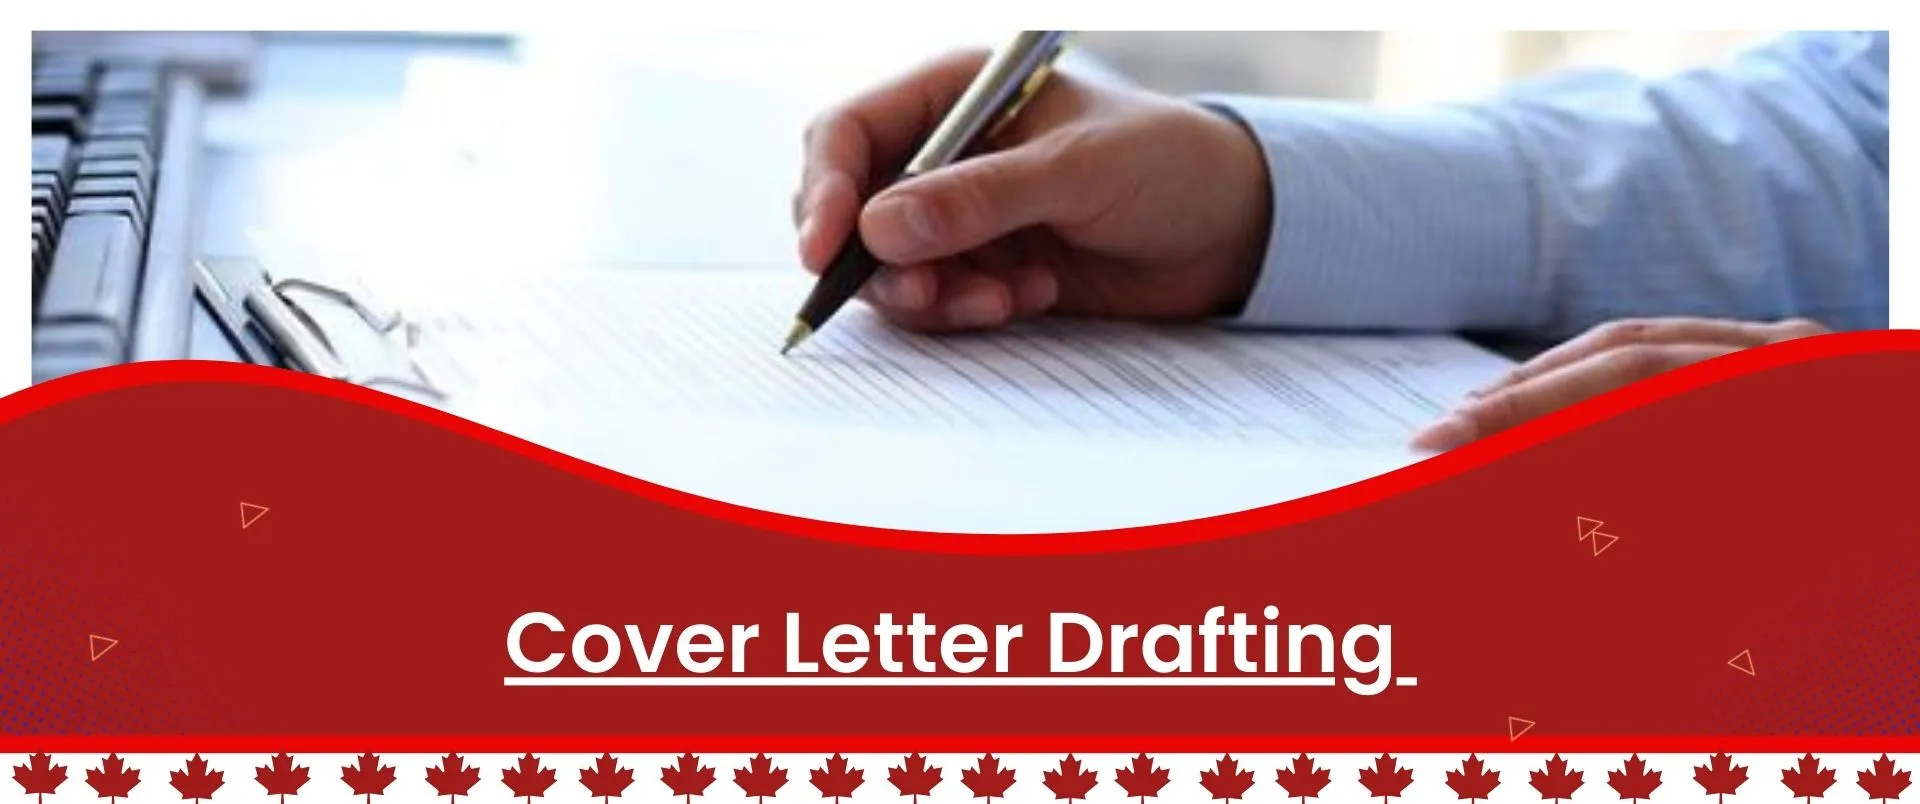 cover letter for job fresher with pen in hands image designed by Isha immigration